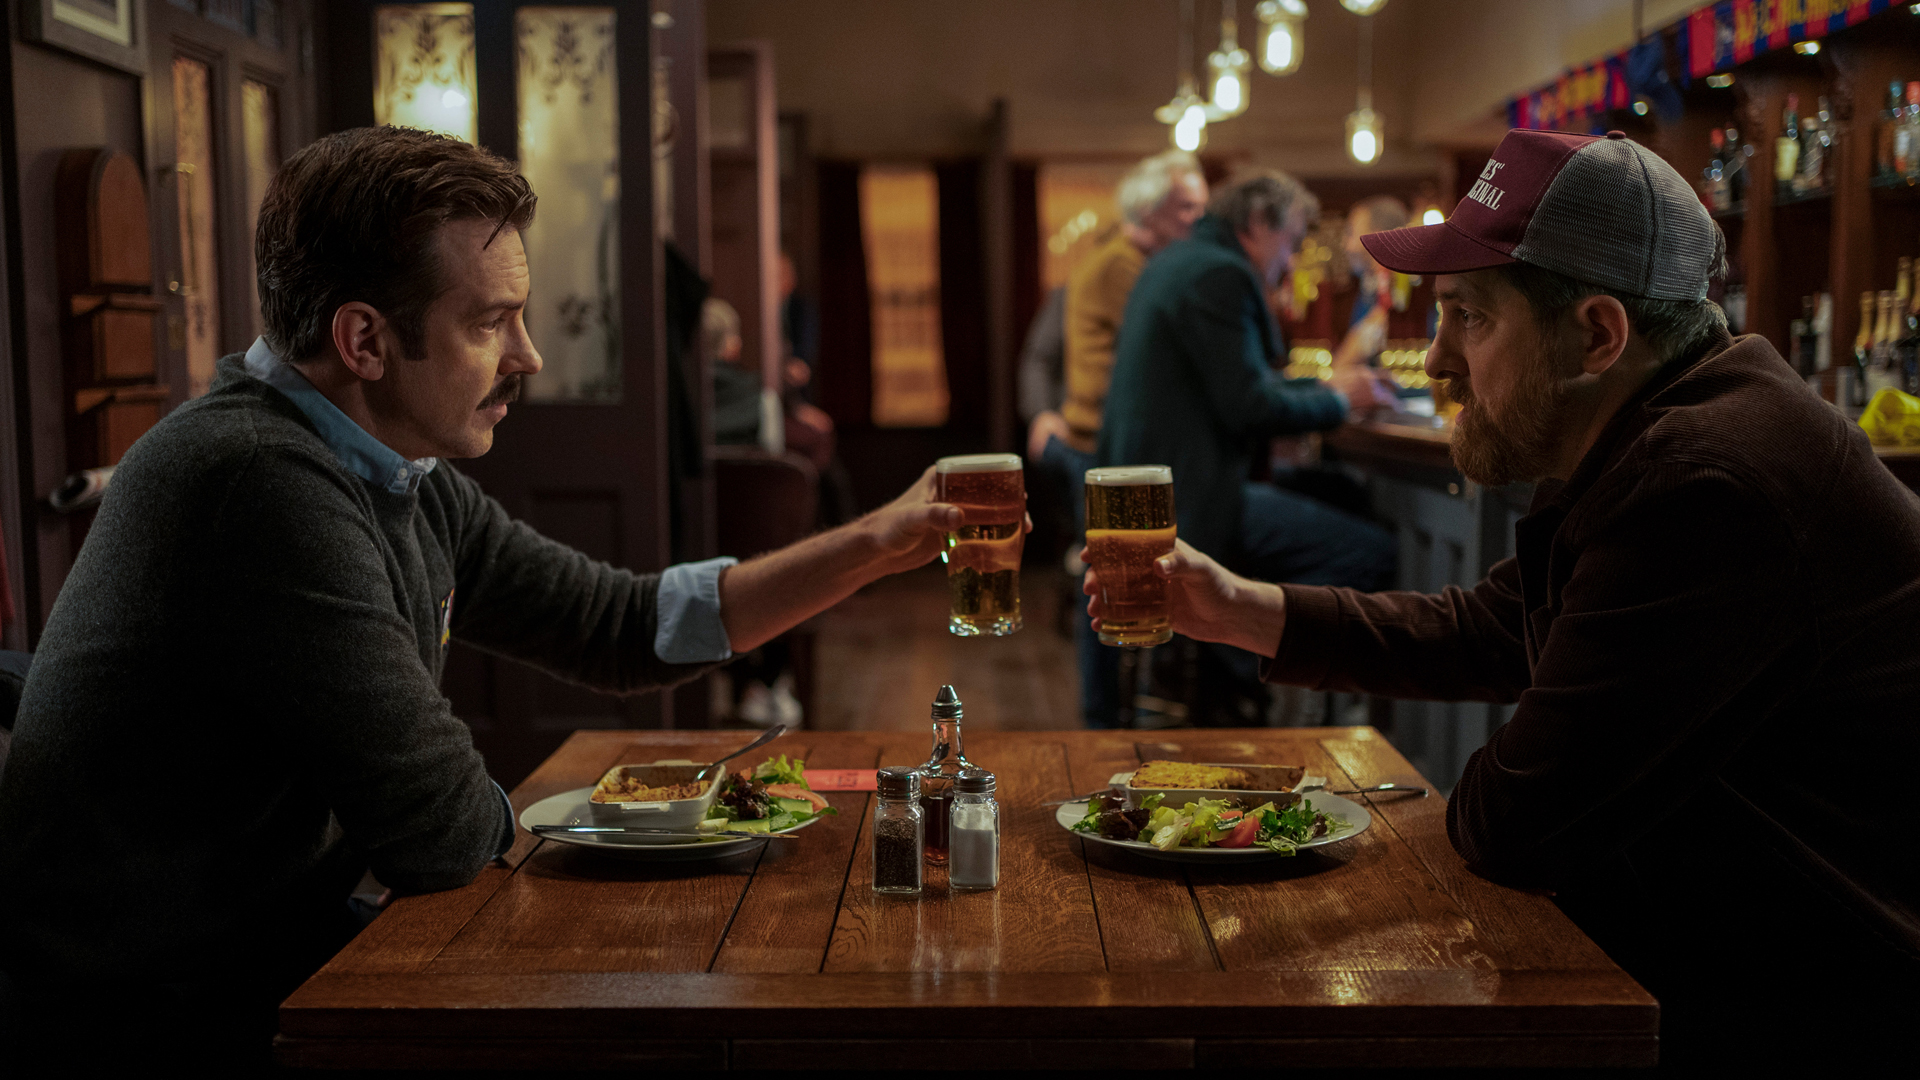 Ted Lasso and Coach Beard share a meal and drink in Ted Lasso season 2